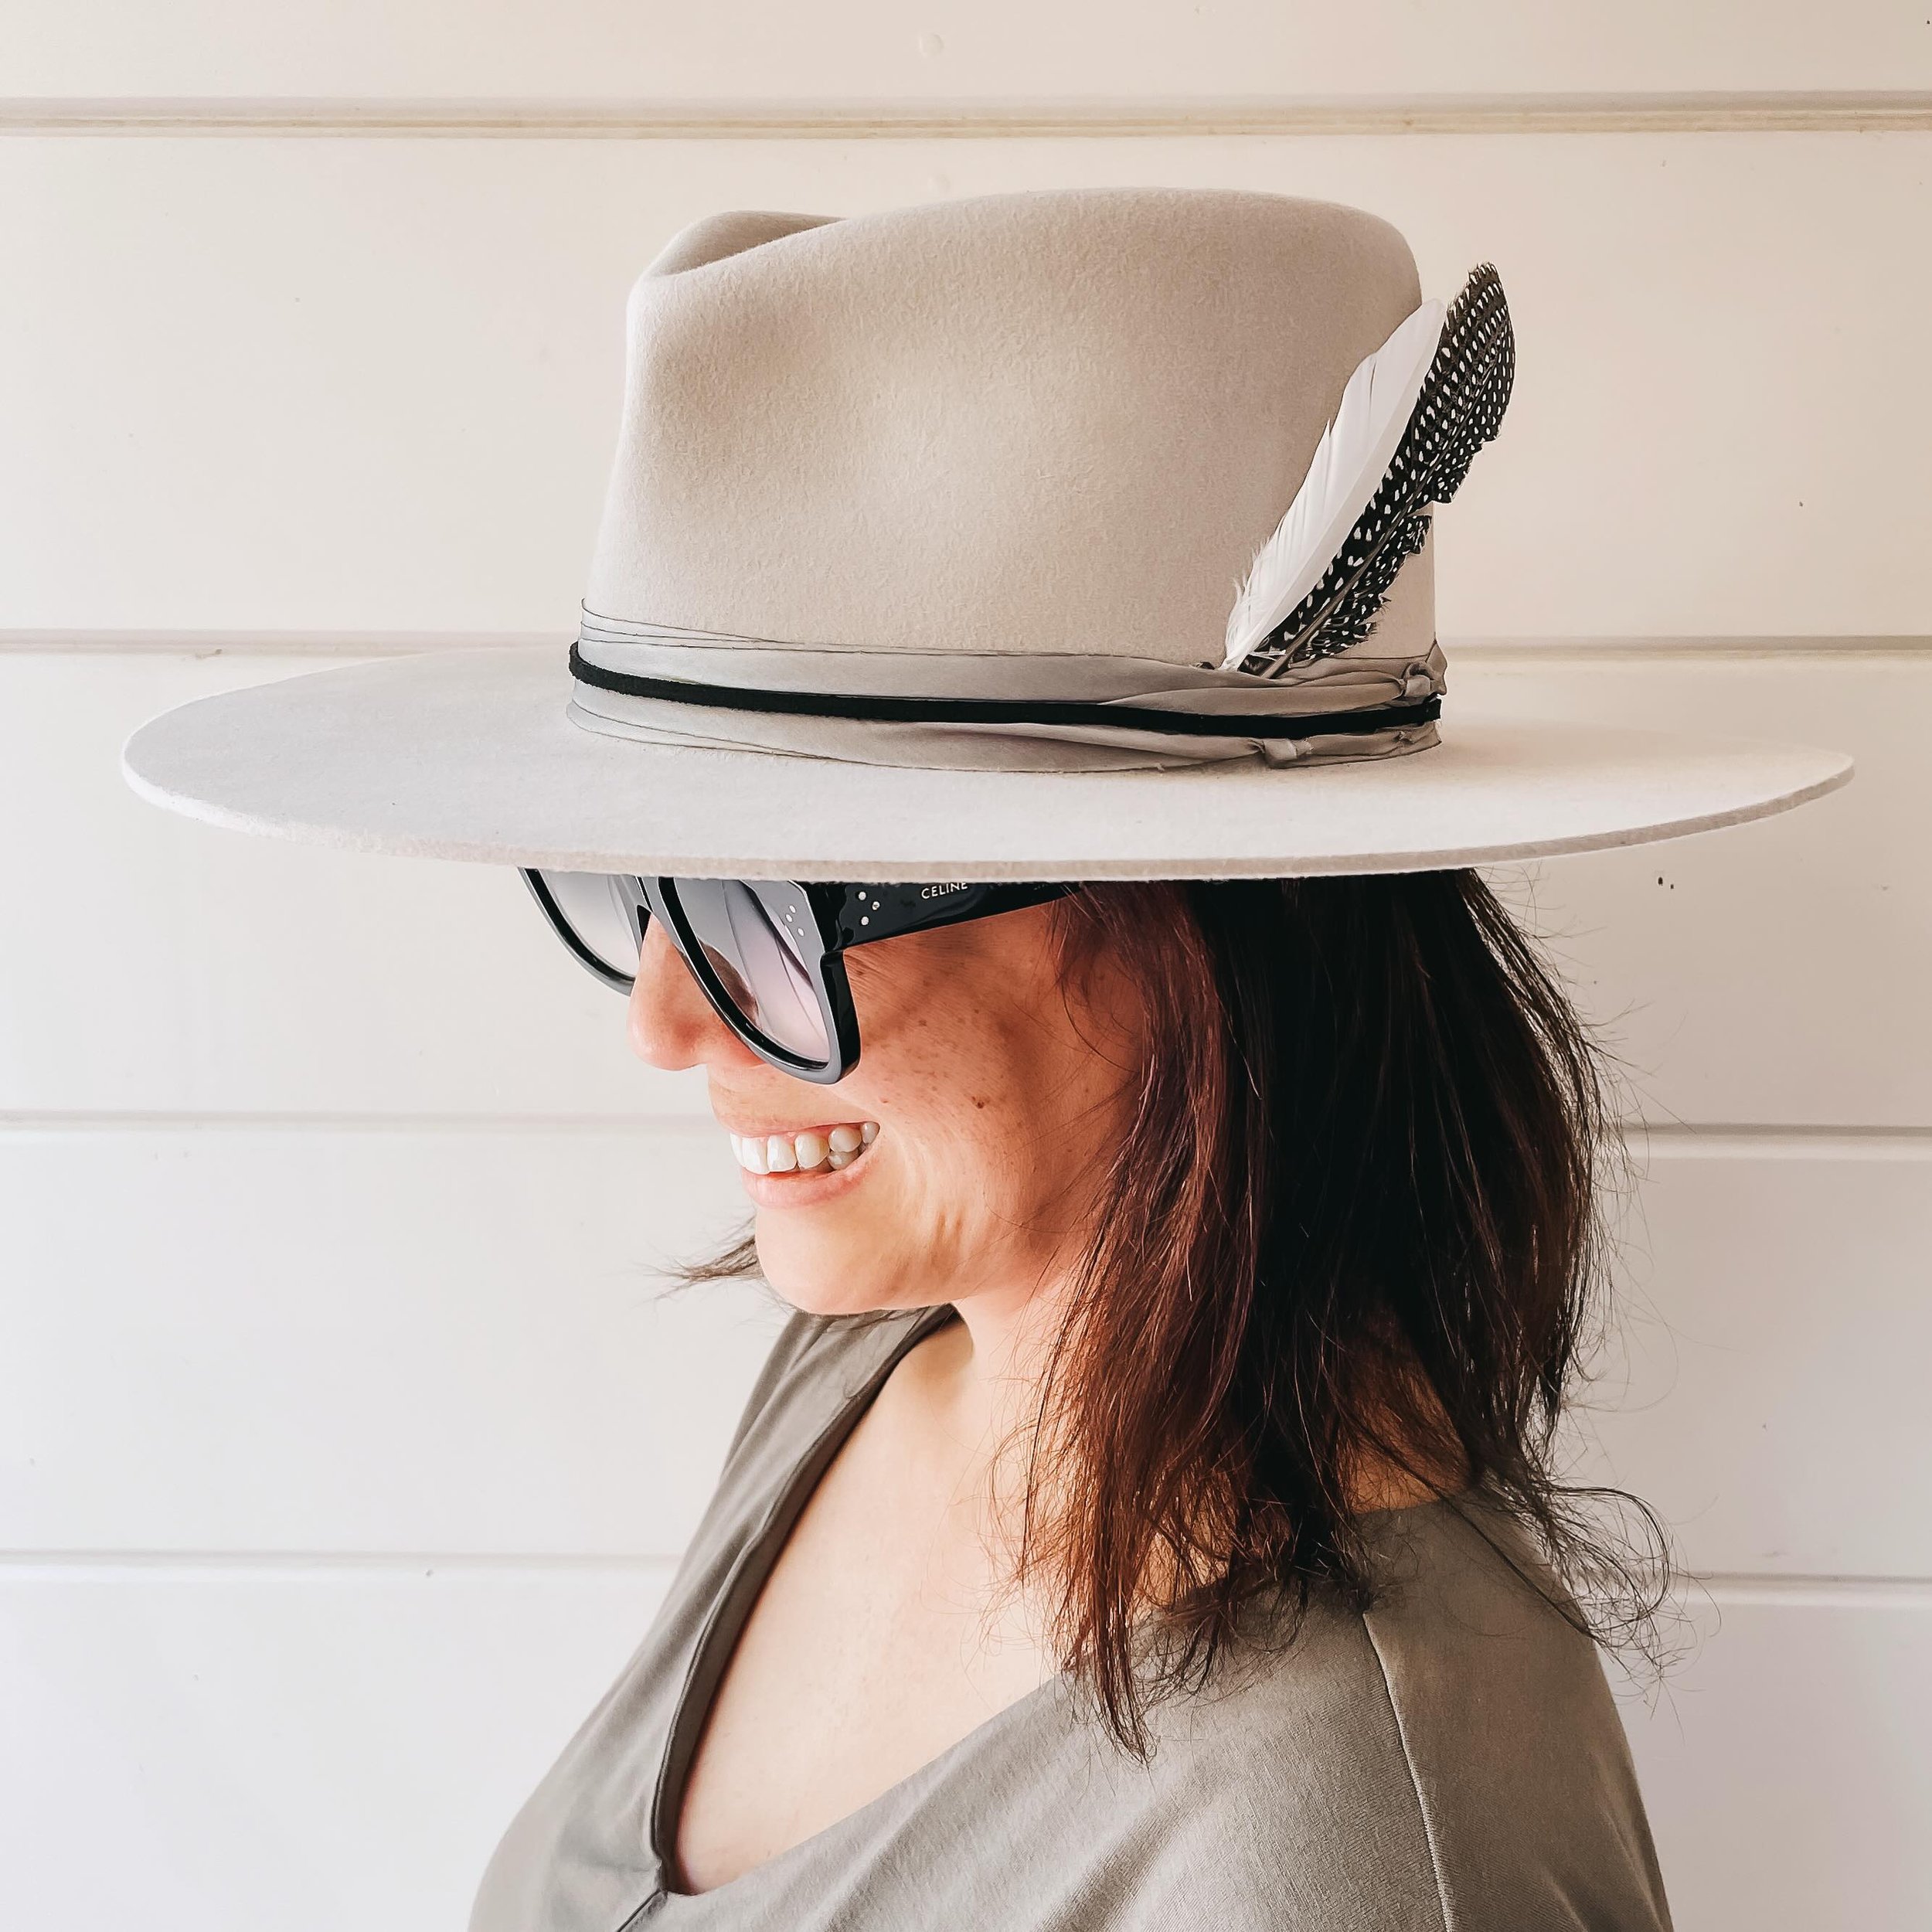 Fridays are for new hats! Check out @rafiki7000 and her gorgeous new hat. Hope it pairs perfectly with your day at the wineries tomorrow. Thanks for supporting us Dewi ❤️ #brimroadhats #brimroad #handmadehats #customhats #shoplocal